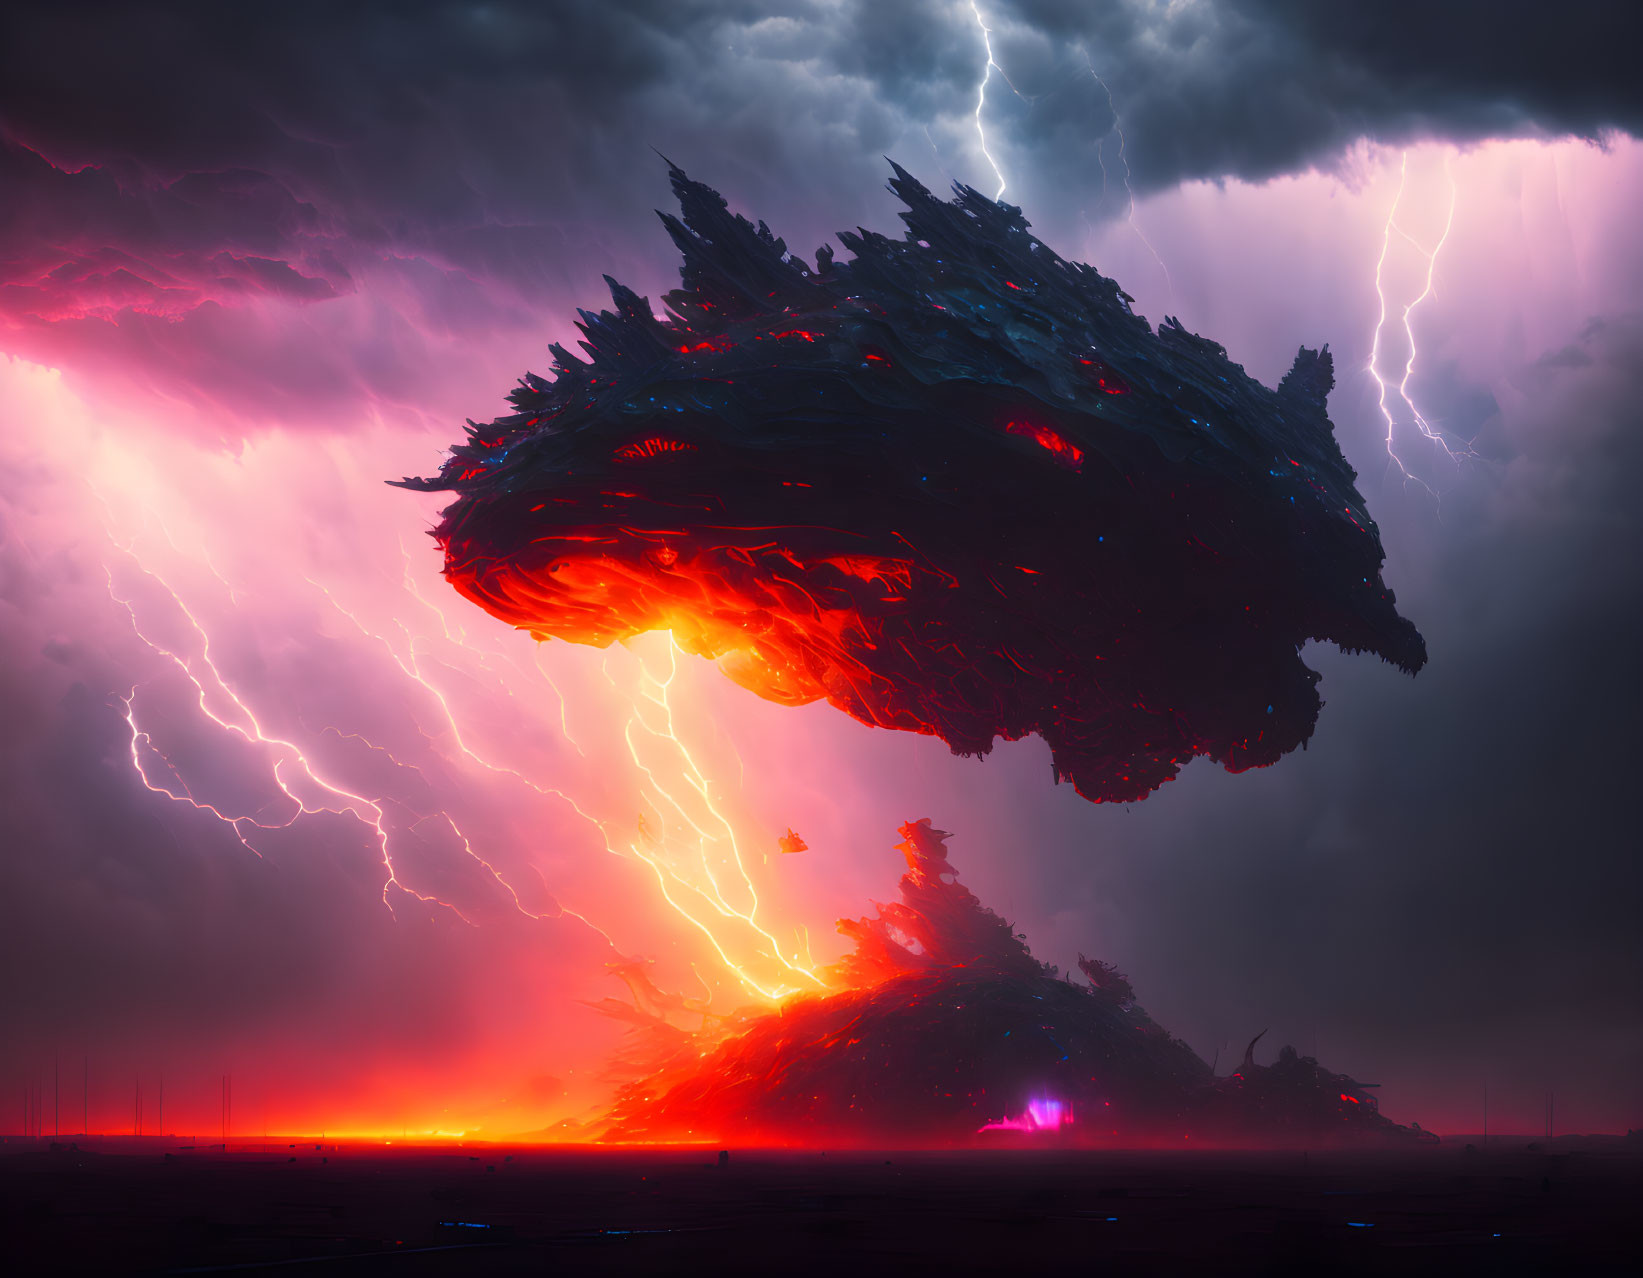 Majestic dragon-like creature in stormy sky with intense lightning and fiery landscape below